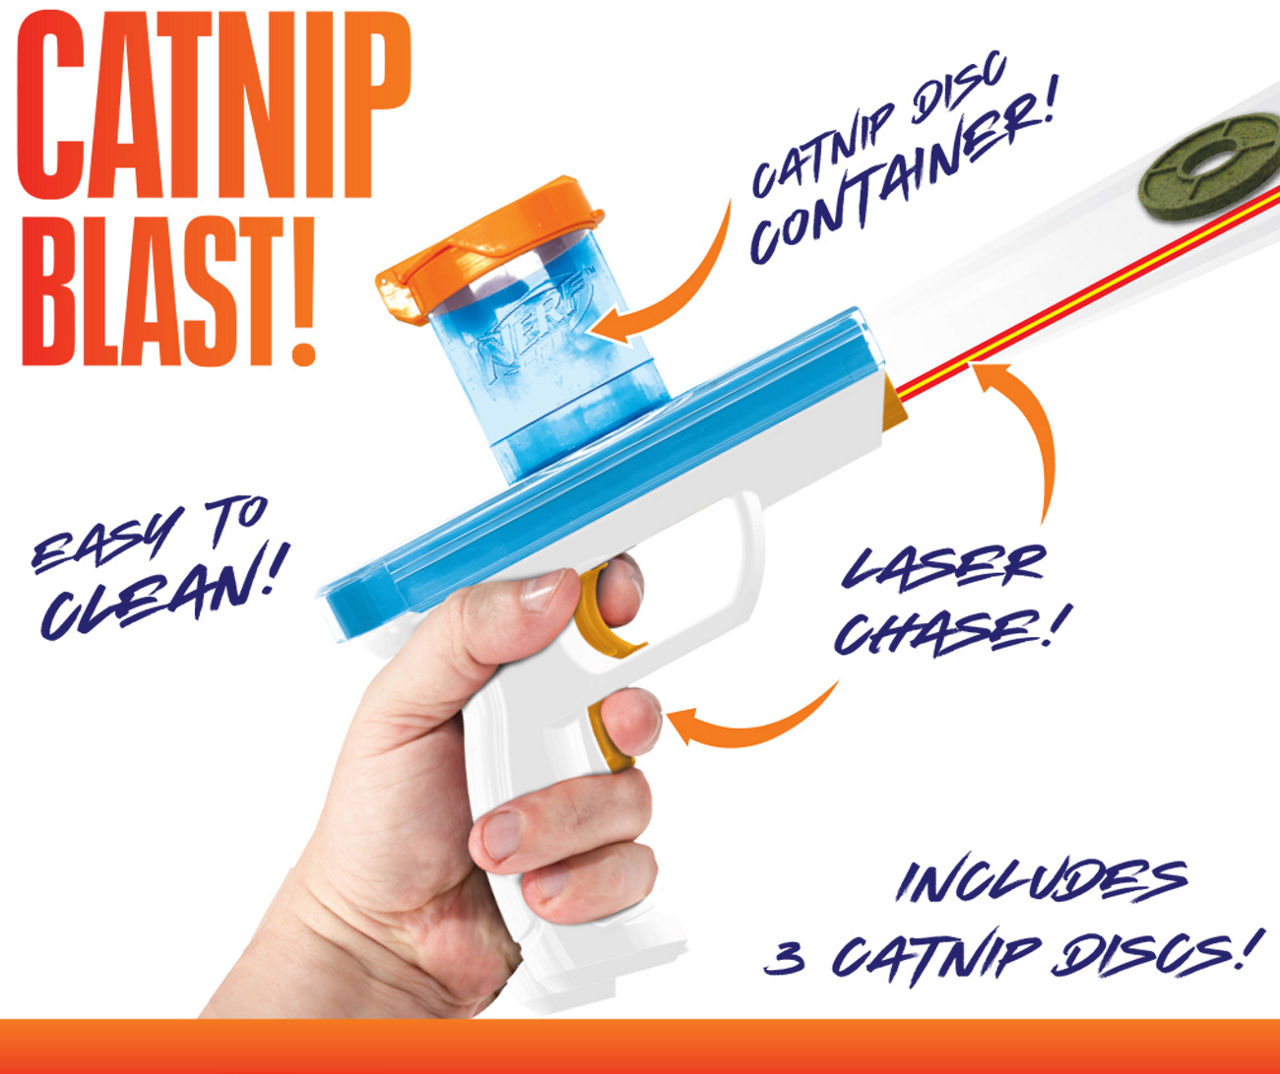 Nerf Catnip Disc Blaster Cat Toy, Small, Pack of 3